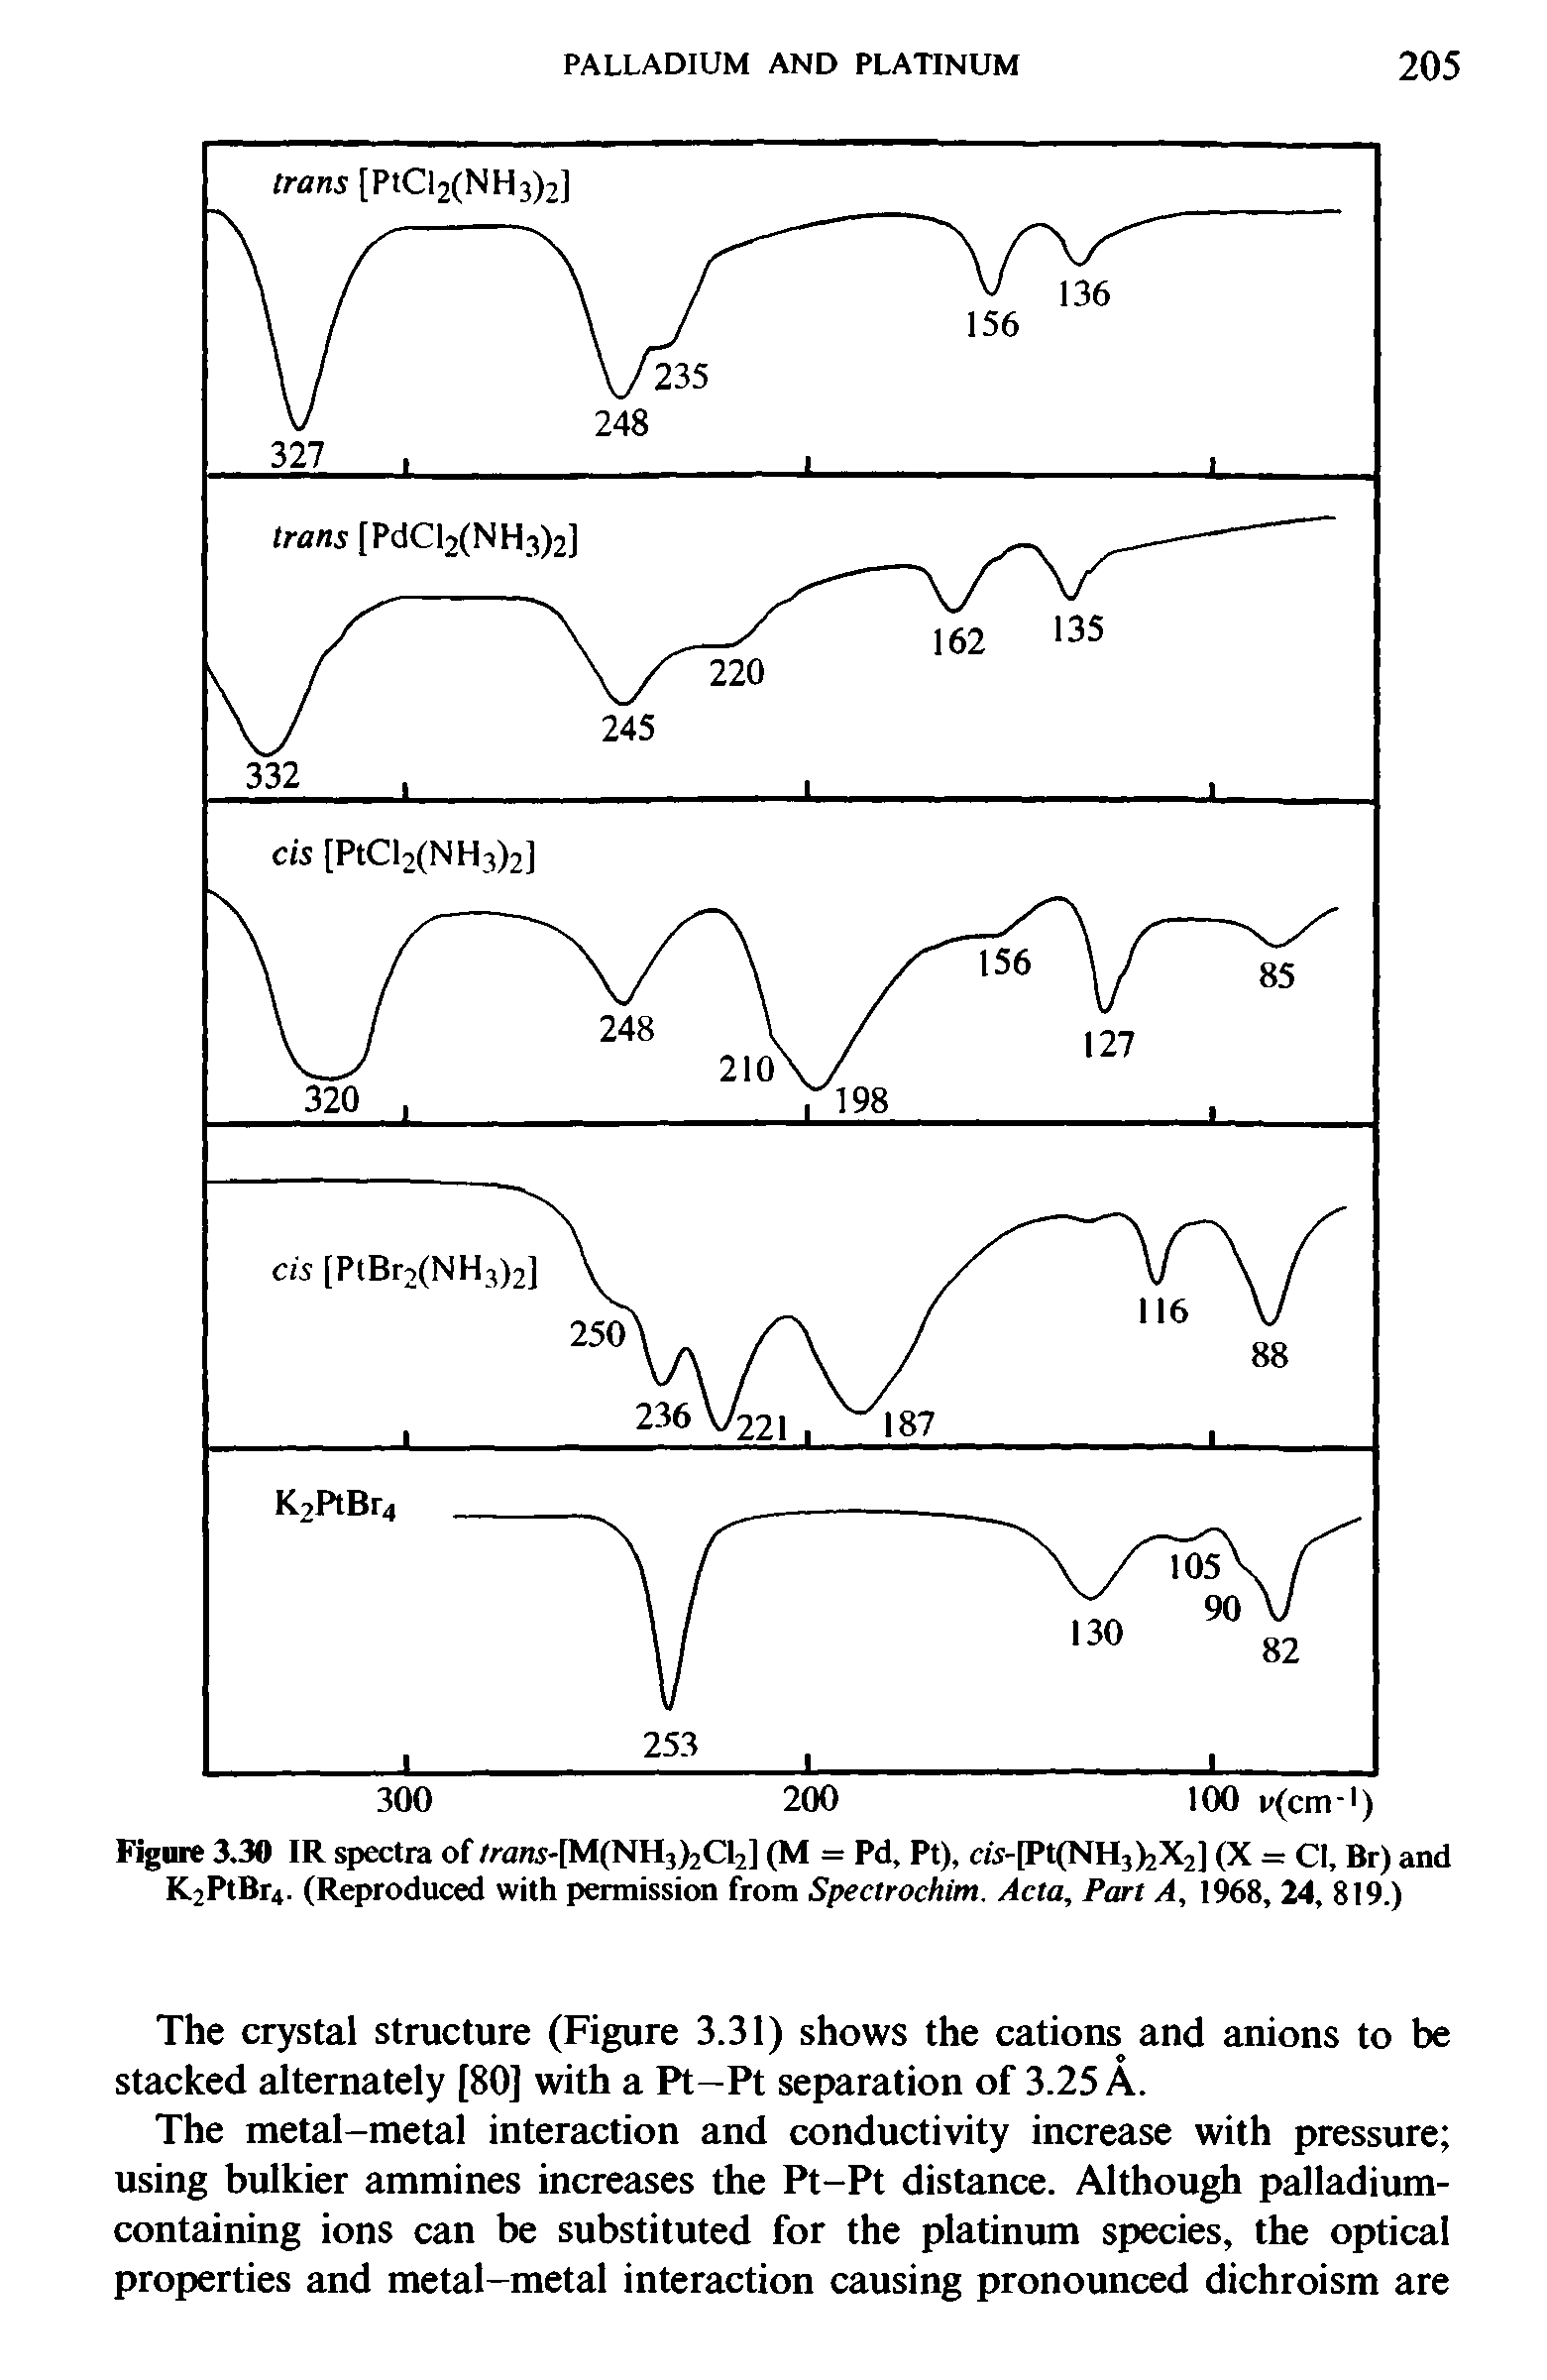 Figure 3.30 IR spectra of /ran5-[M(NH3)2CI2] (M = Pd, Pt), m-[Pt(NH2)2X2] (X = Cl, Br) and K2PtBr4. (Reproduced with permission from Spectrochim. Acta, Part A, 1968, 24, 819.)...